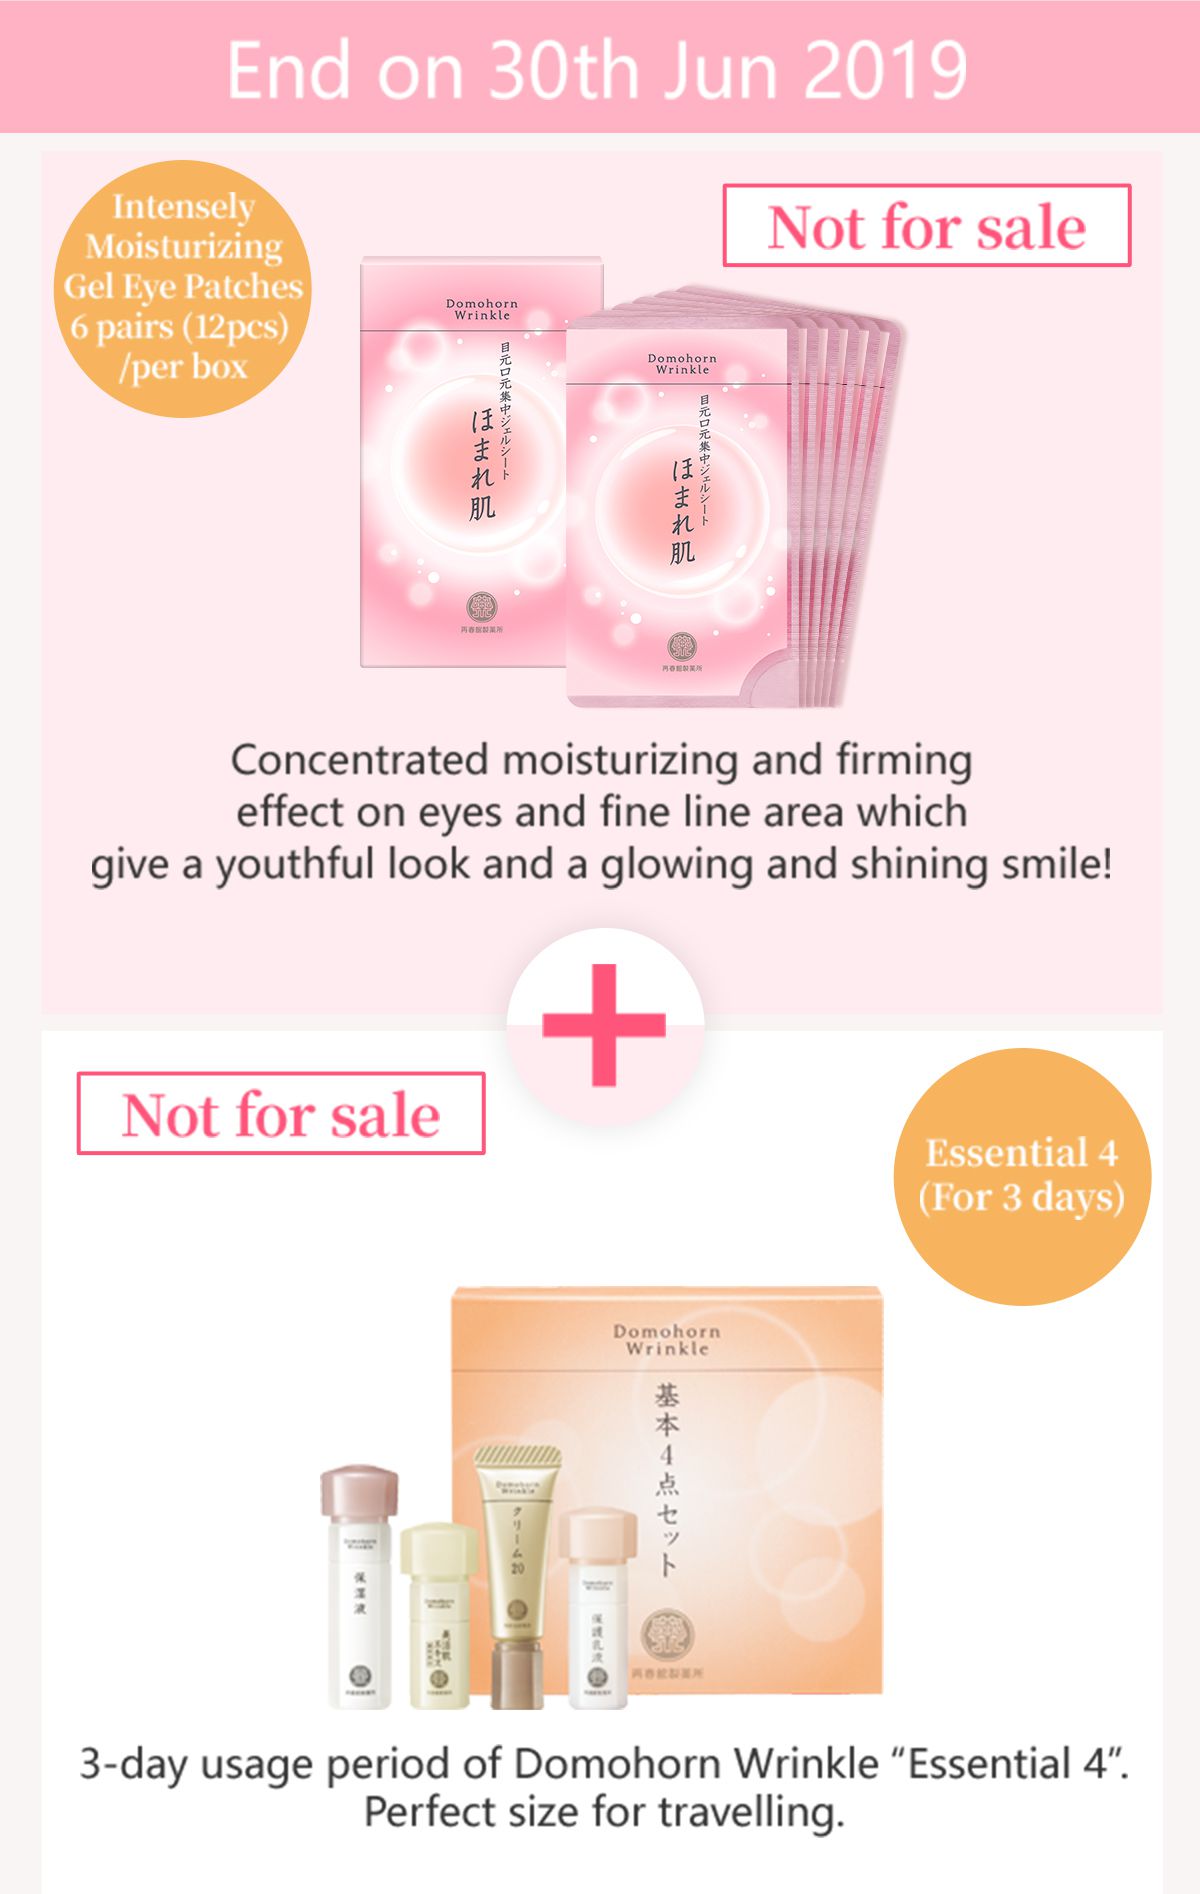 End on 30th Jun 2019 Not for sale Intensely Moisturizing Gel Eye Patches 6 pairs (12pcs) /per box Concentrated moisturizing and firming effect on eyes and fine line area which give a youthful look and a glowing and shining smile! Essential 4 (For 3 days) 3-day usage period of Domohorn Wrinkle “Essential 4”. Perfect size for travelling.